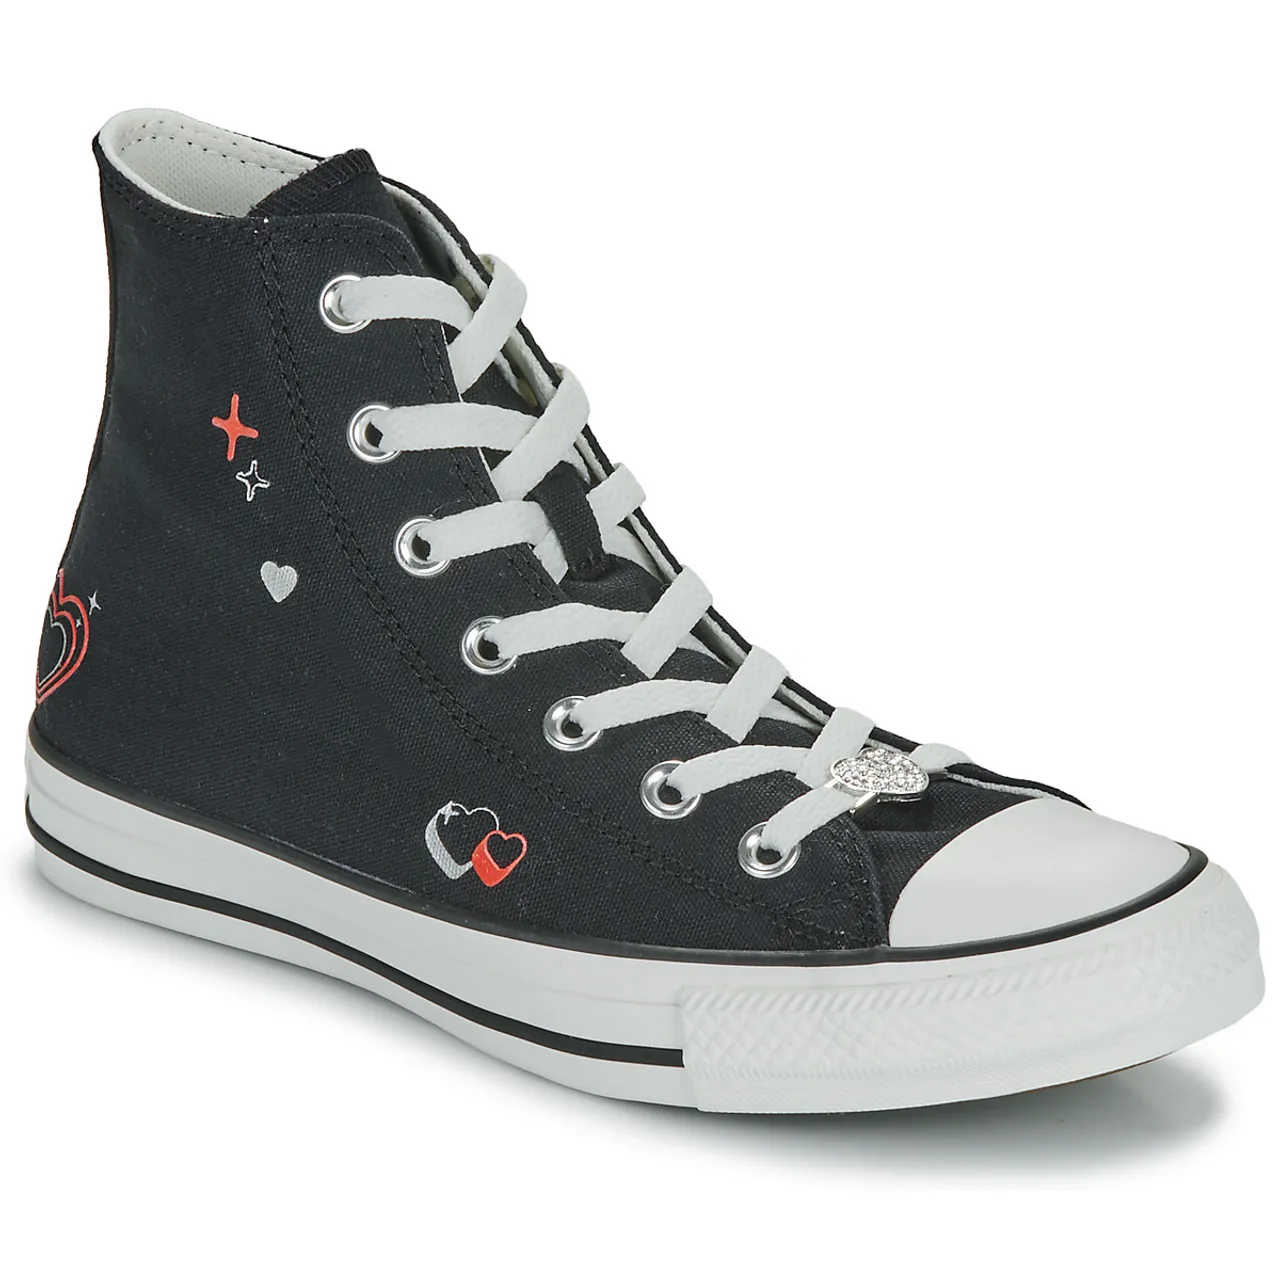 Converse  CHUCK TAYLOR ALL STAR  women's Shoes (High-top Trainers) in Black